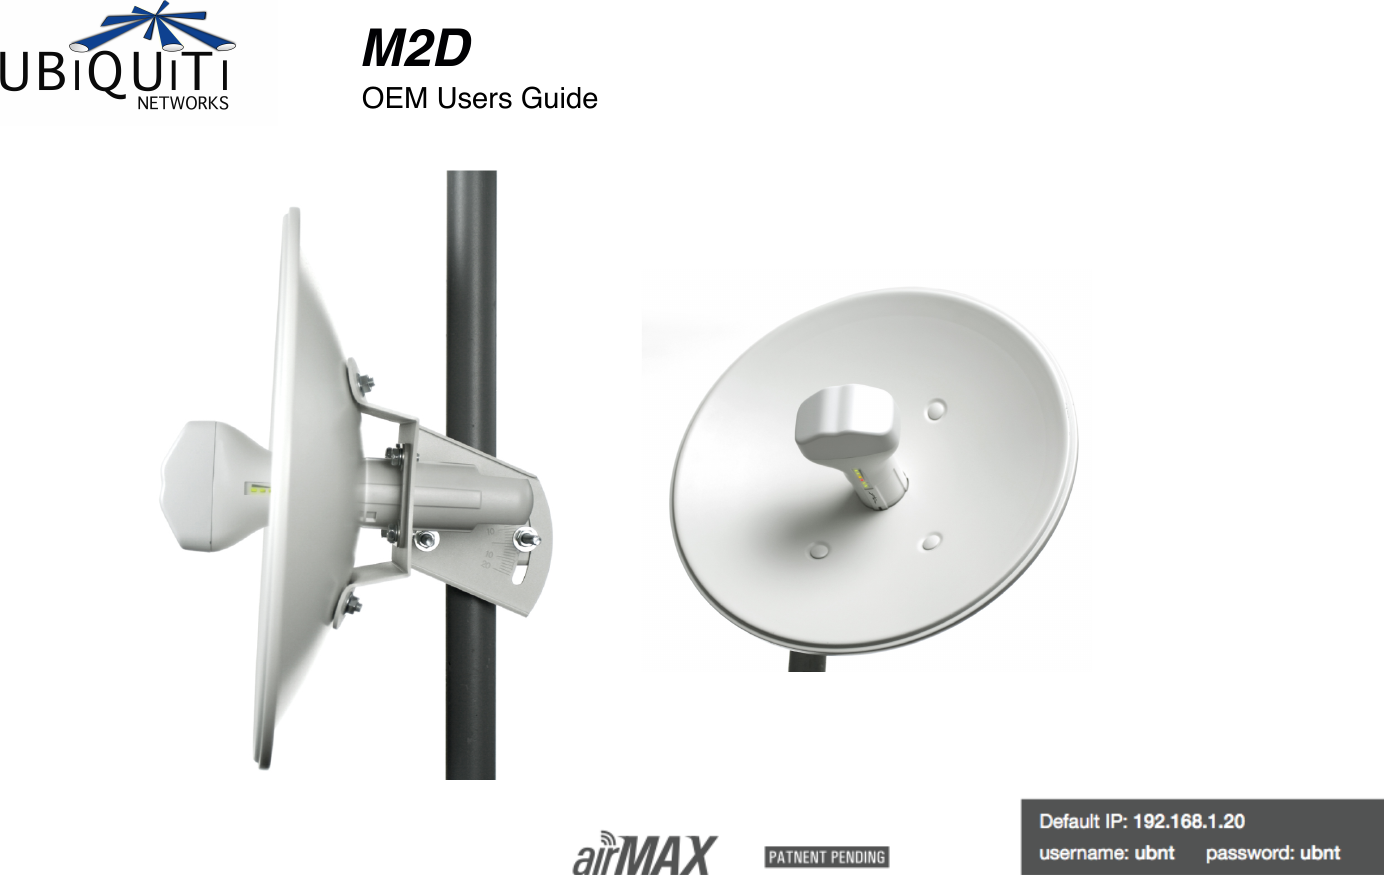 M2DOEM Users Guide